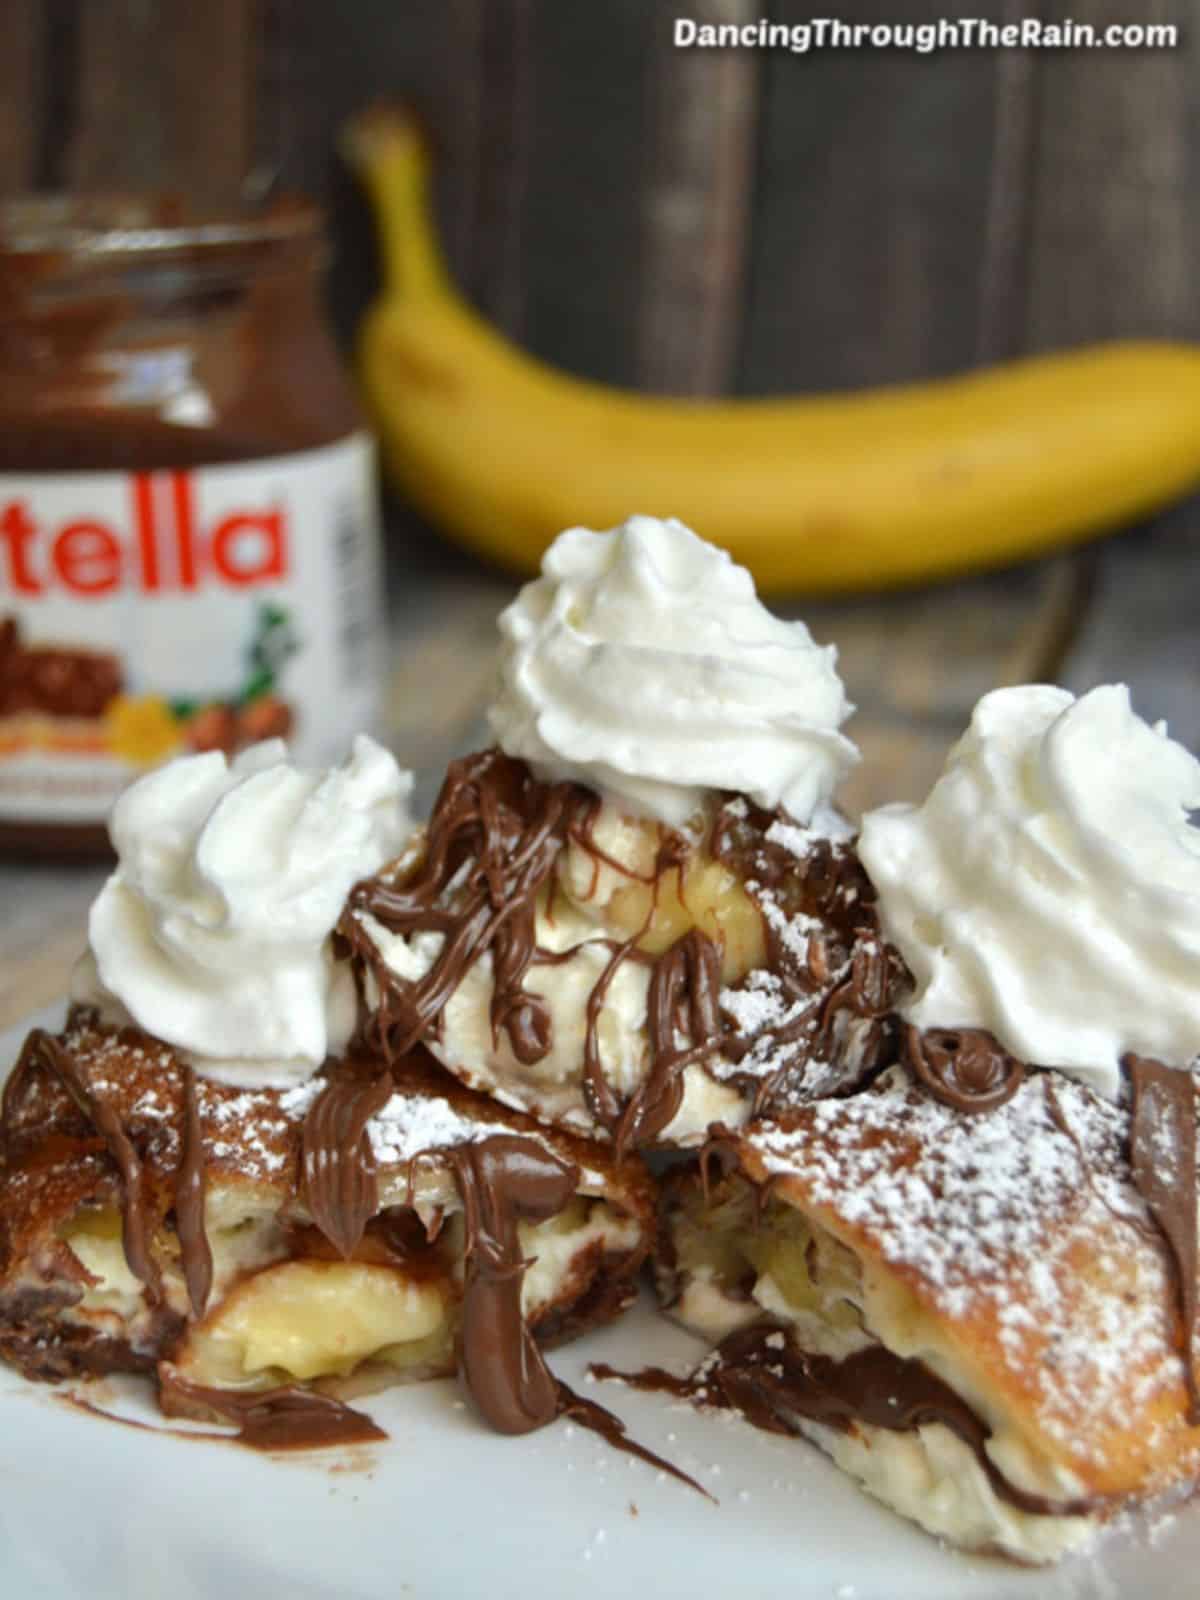 fried banana Nutella cheesecake egg rolls made with a basic egg roll wrapper that is stuffed with banana, cheesecake filling, and Nutella spread.